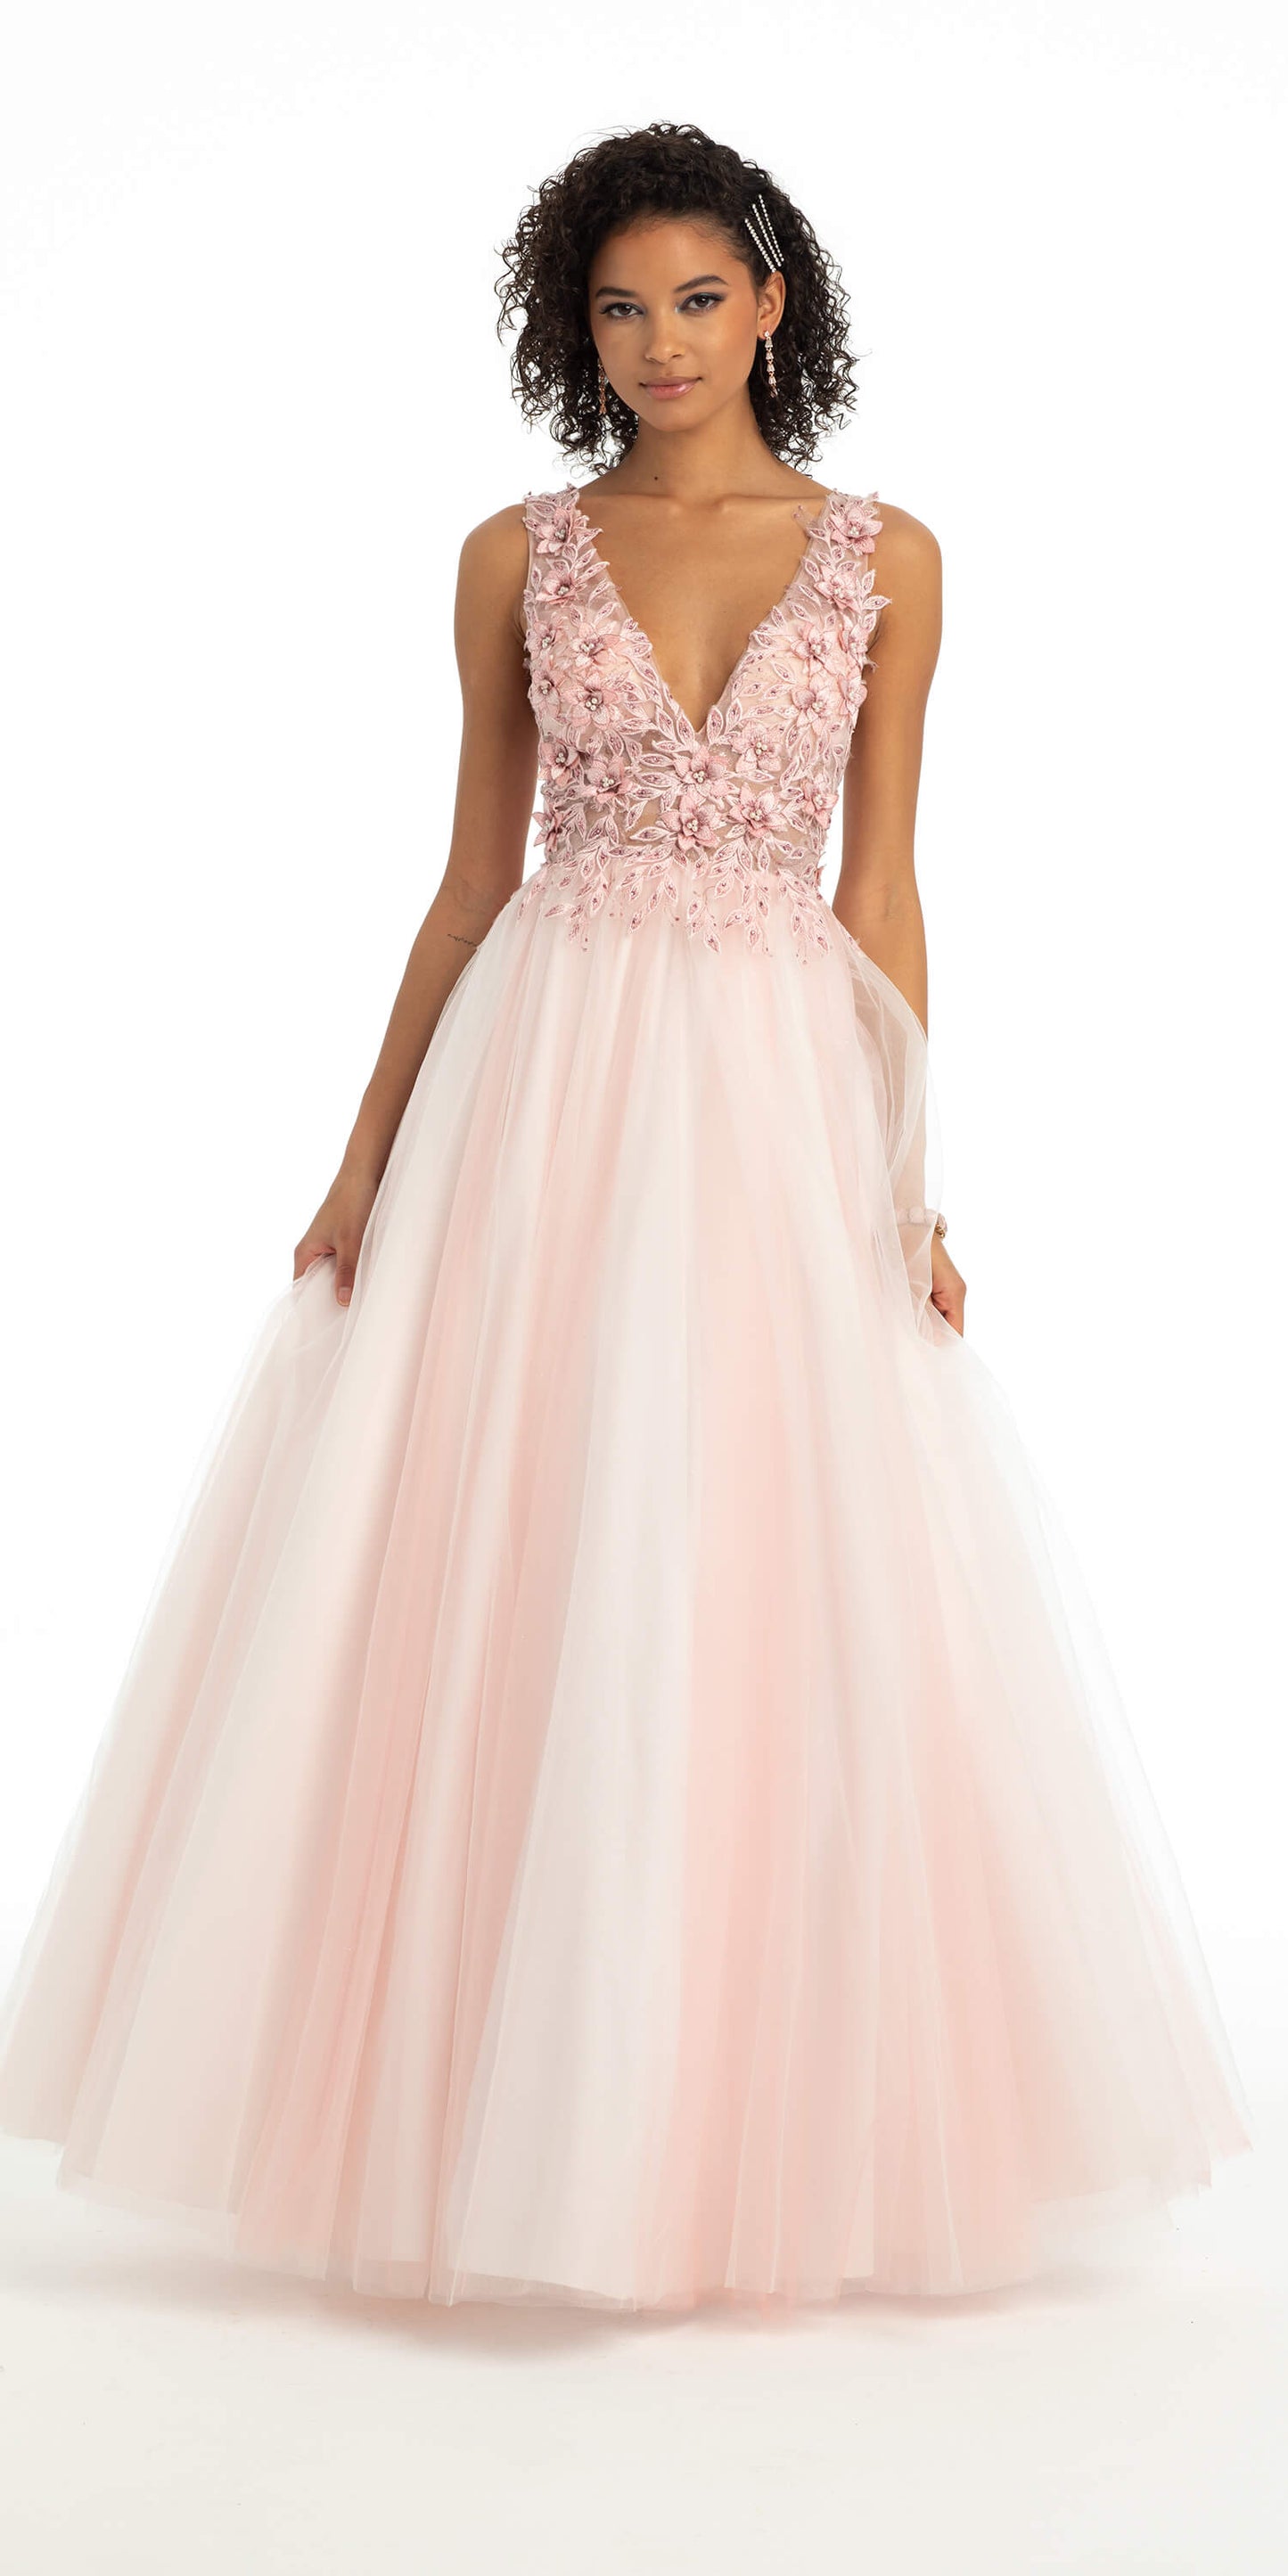 Camille La Vie Tulle Embellished V Neck Ballgown with 3D Flowers missy / 0 / ivory-pink